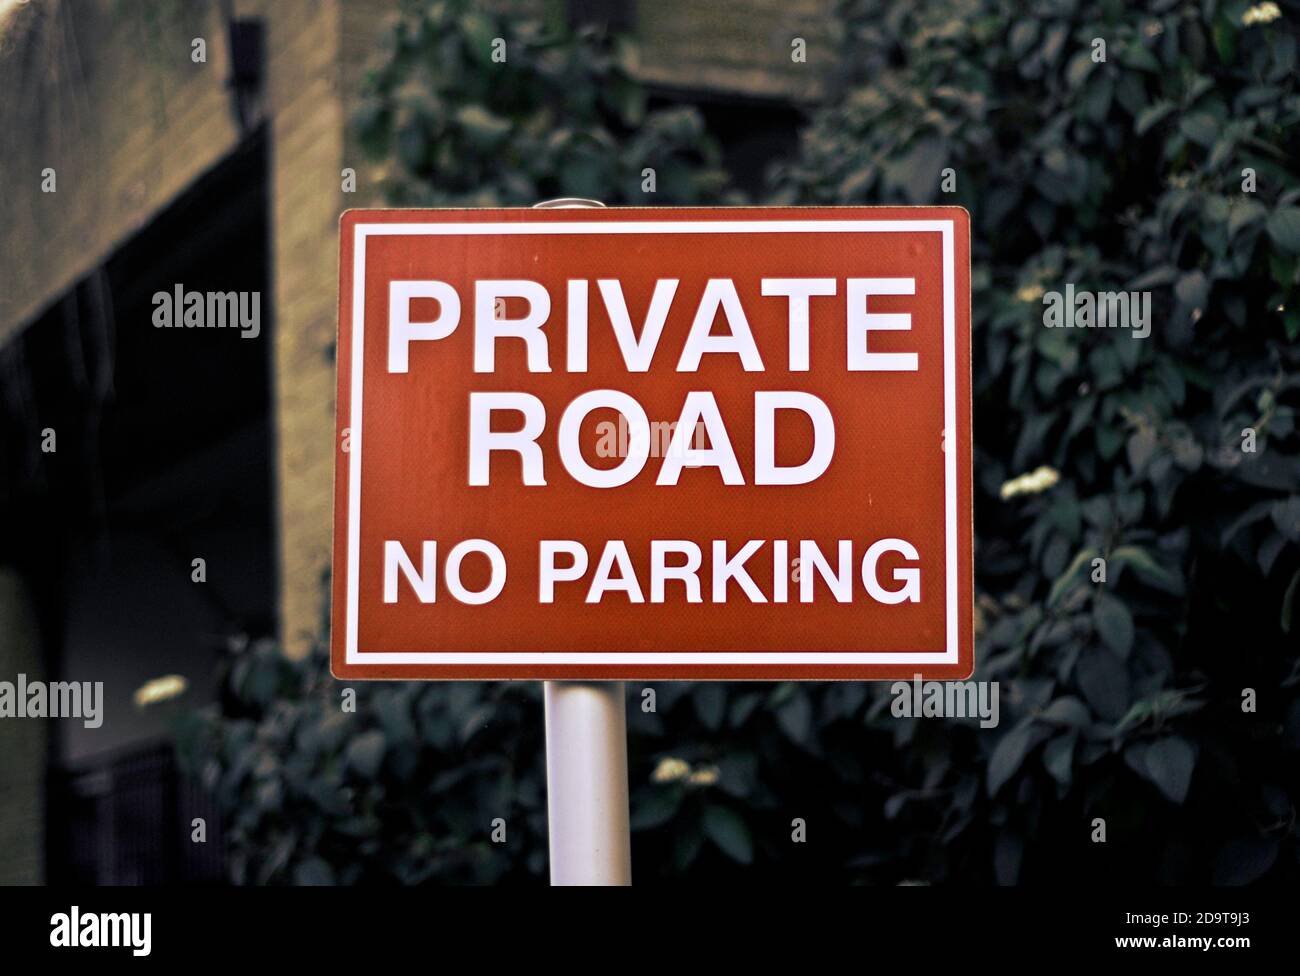 Private road, no parking sign. Not allowed. No thoroughfare. Clear red and white sign. Stock Photo